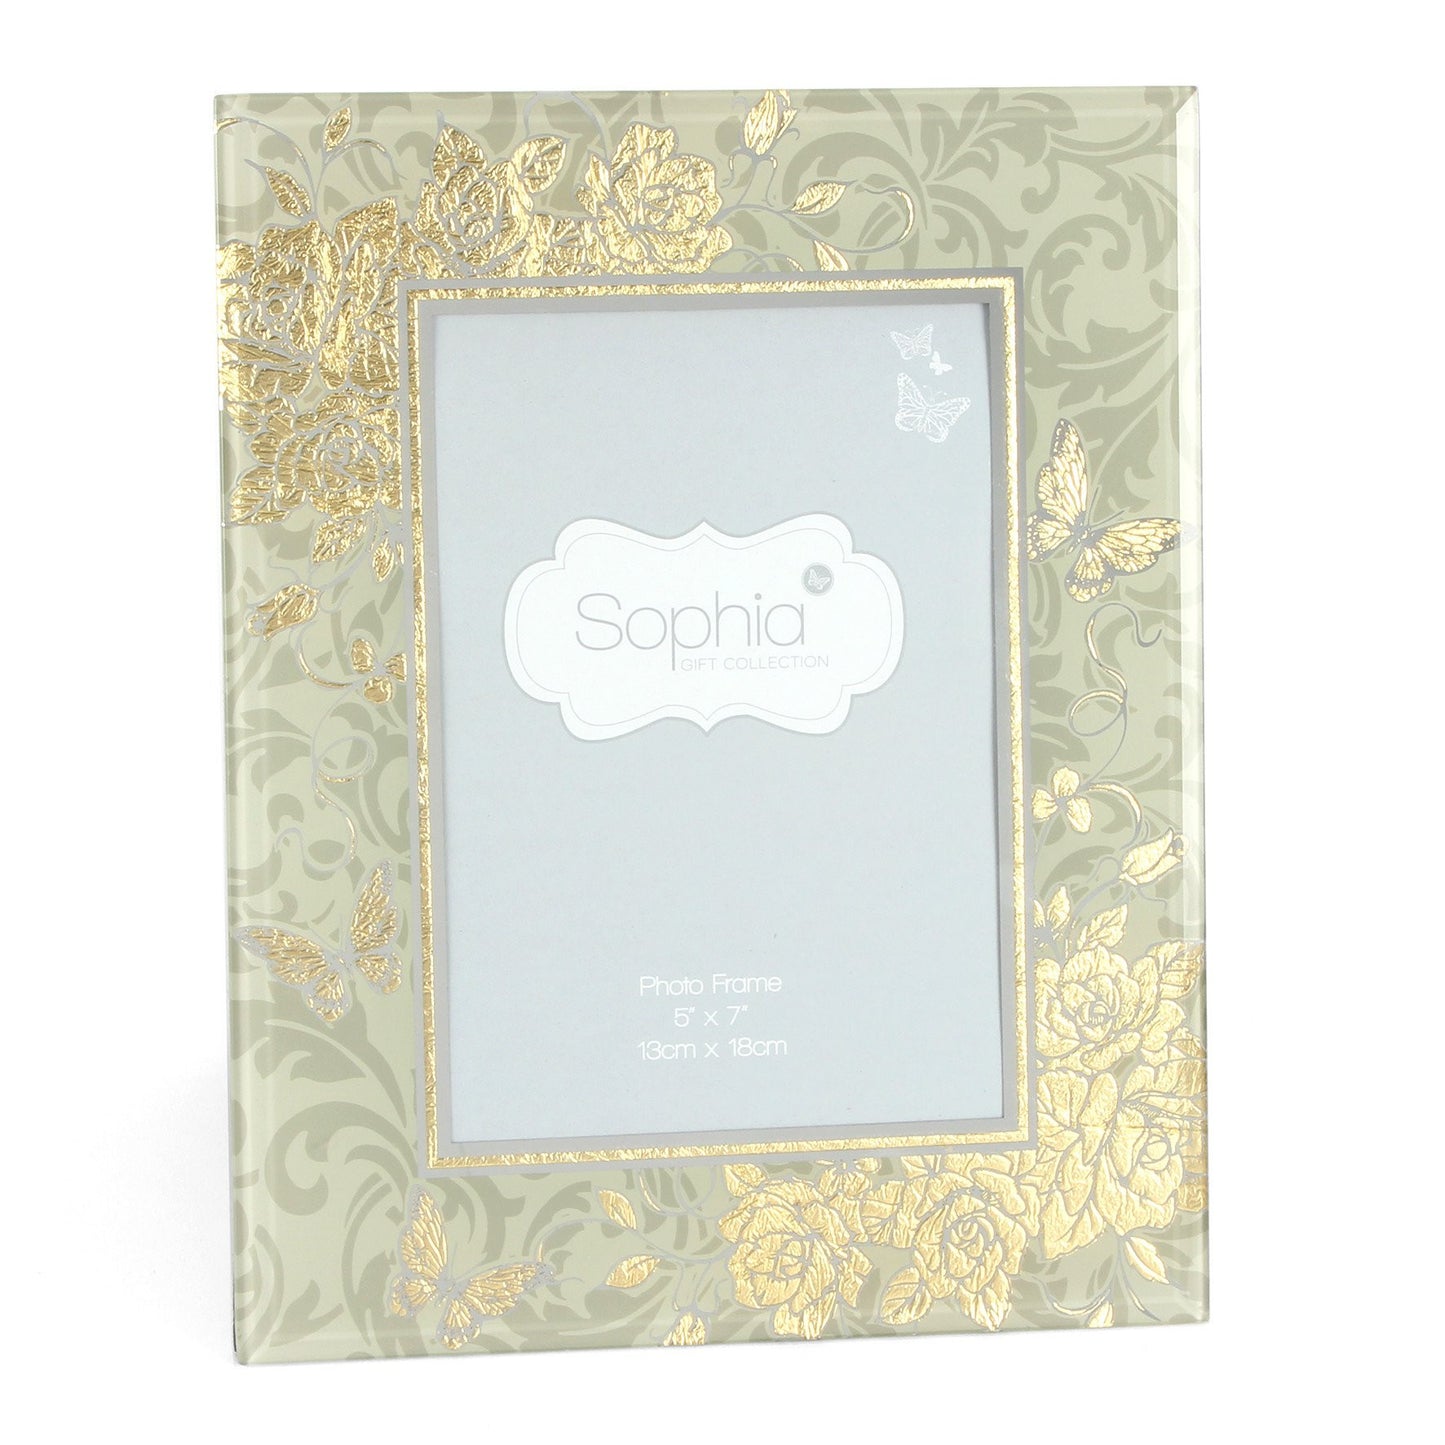 Sophia Gold Rose Collection Photo Frame 5" x 7"